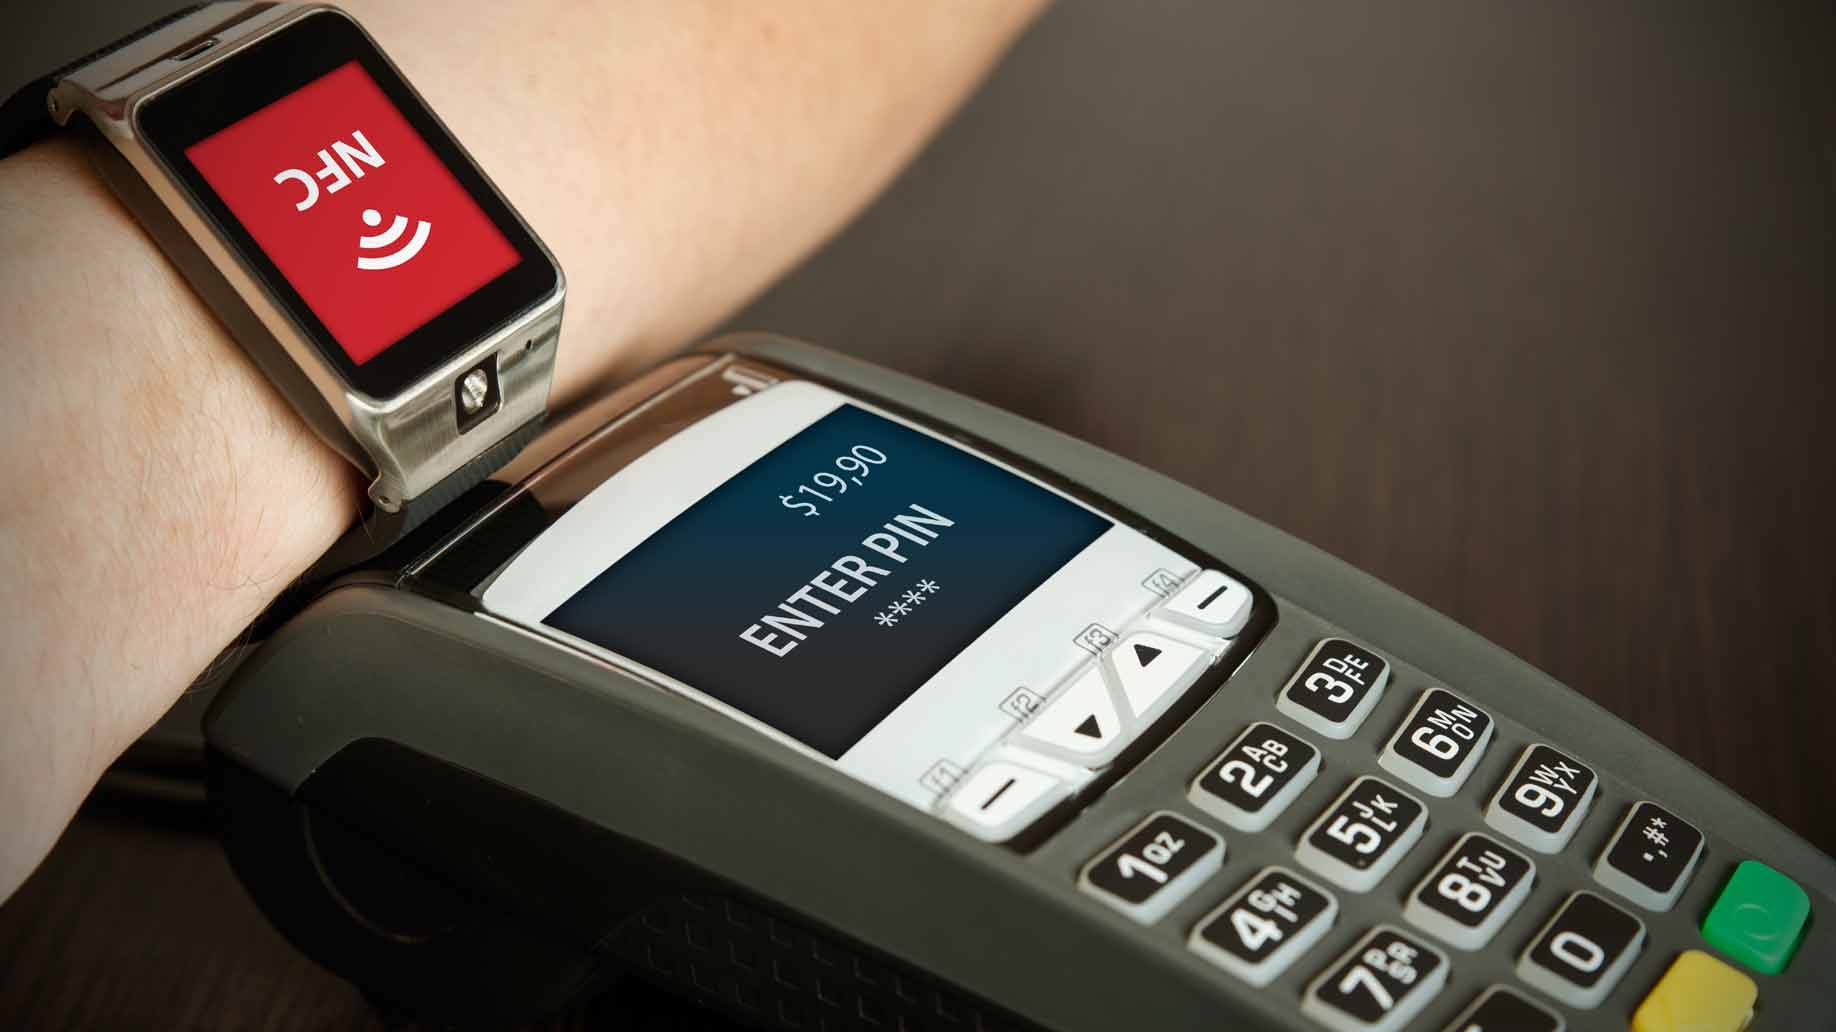 Forbes tips for adopting new payment technologies pic